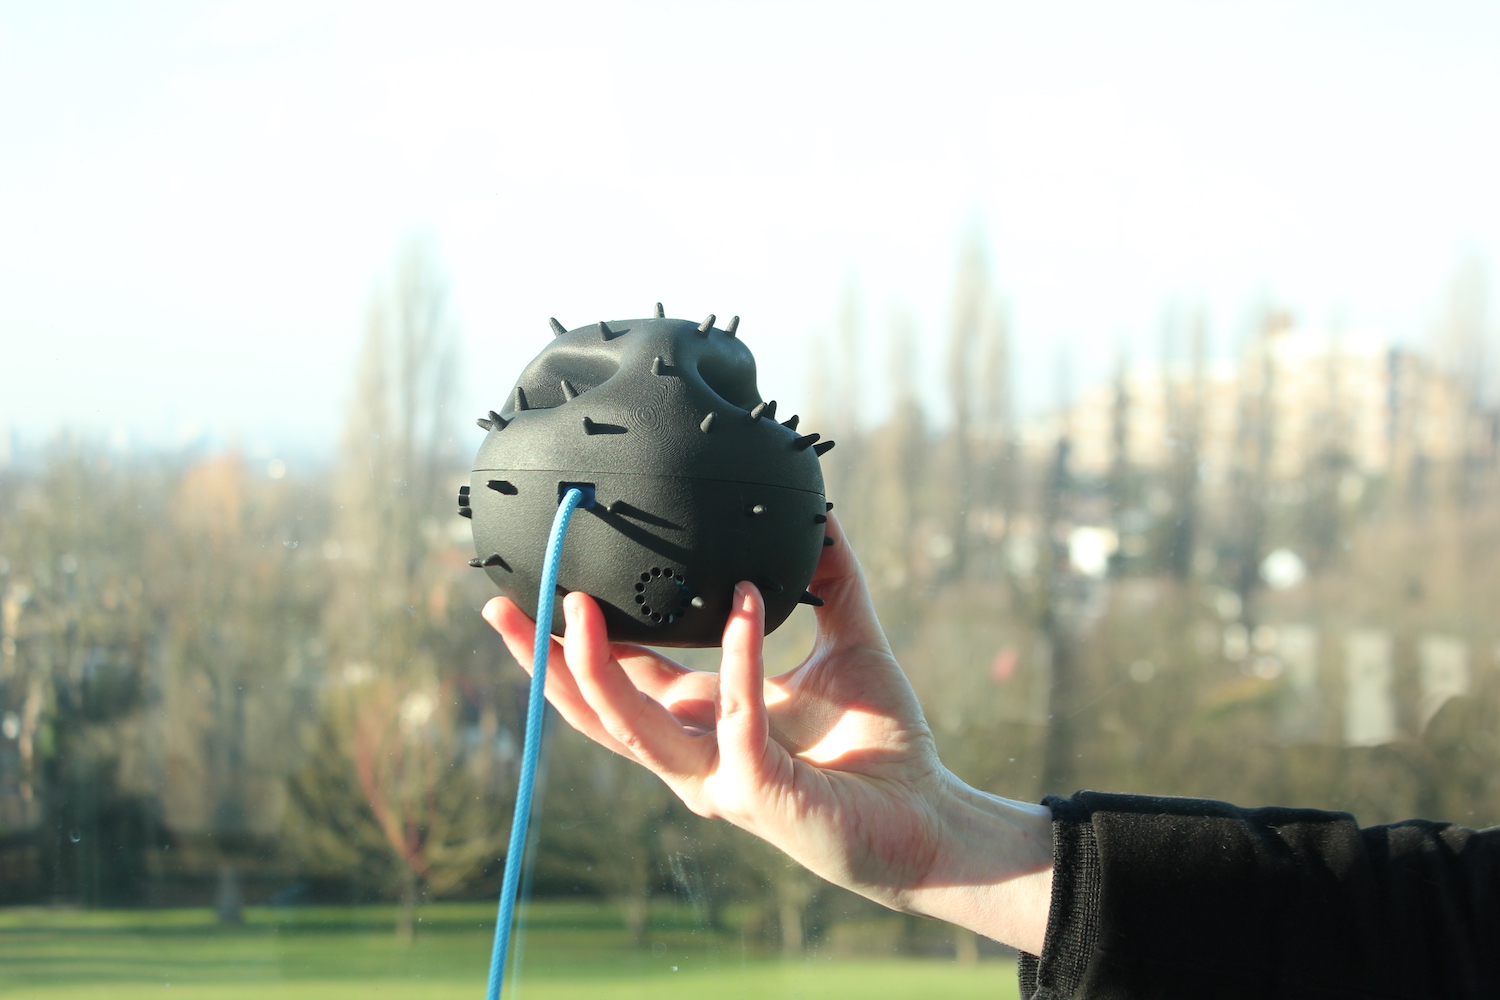 A pollen Dustbox 2.0 held up by a hand overlooking London from the Horniman museum